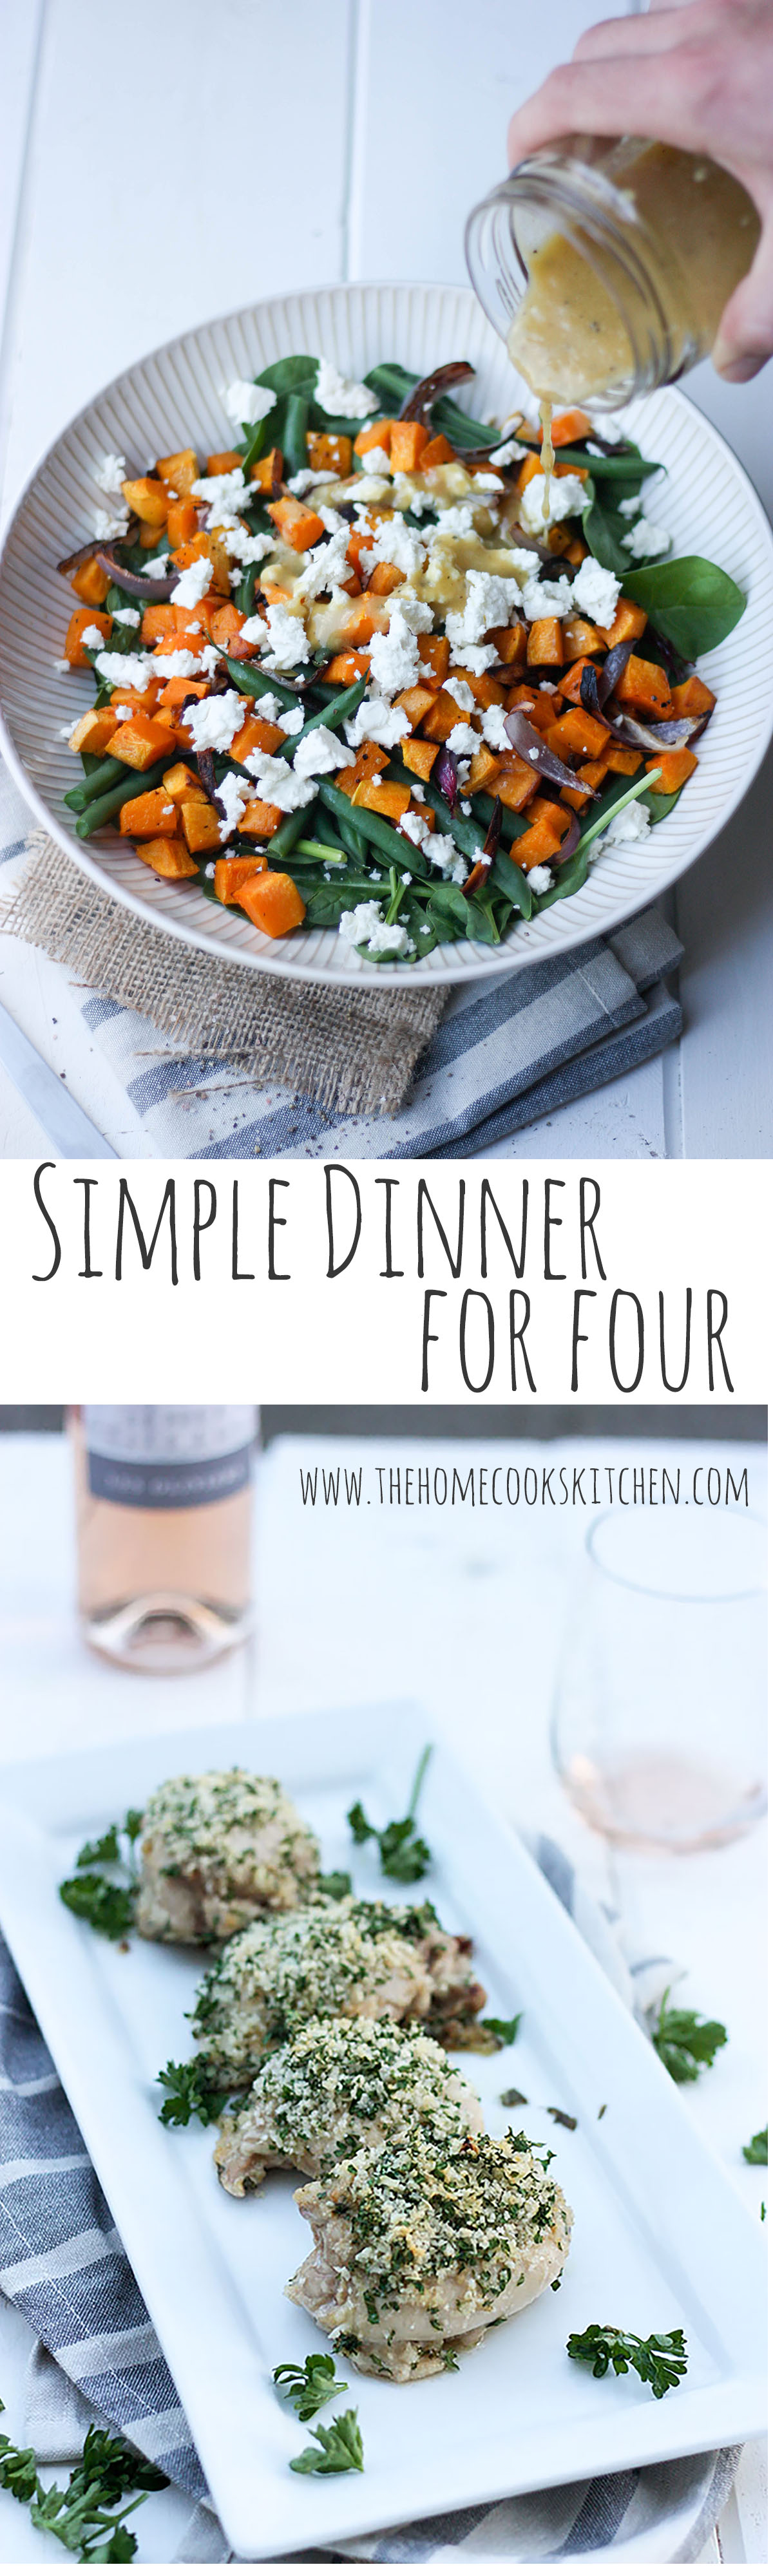 Simple Dinner for Four www.thehomecookskitchen.com